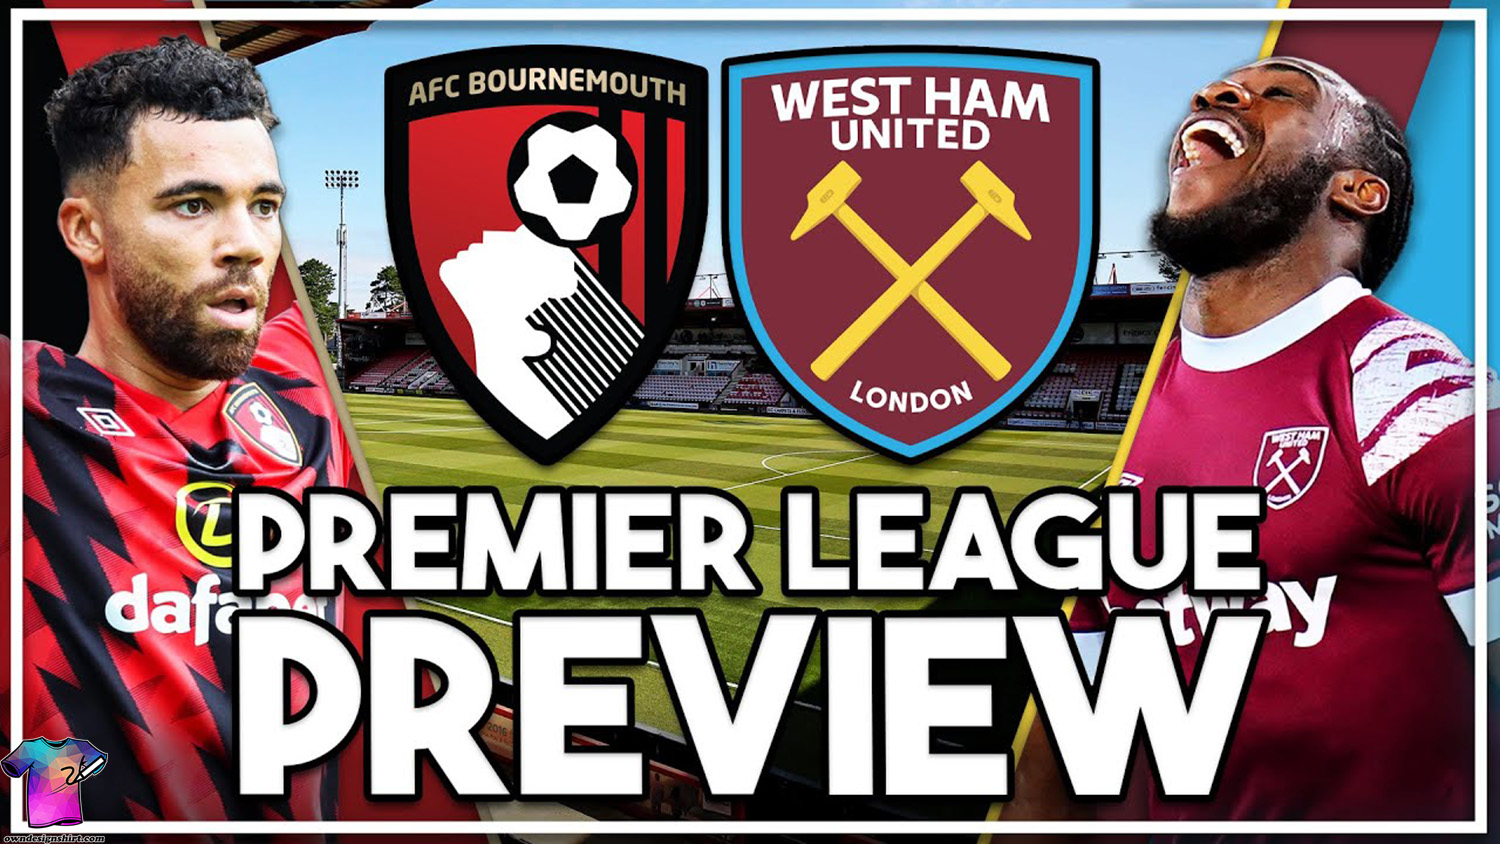 Anticipating a Thriller West Ham United vs AFC Bournemouth Head-to-Head at London Stadium